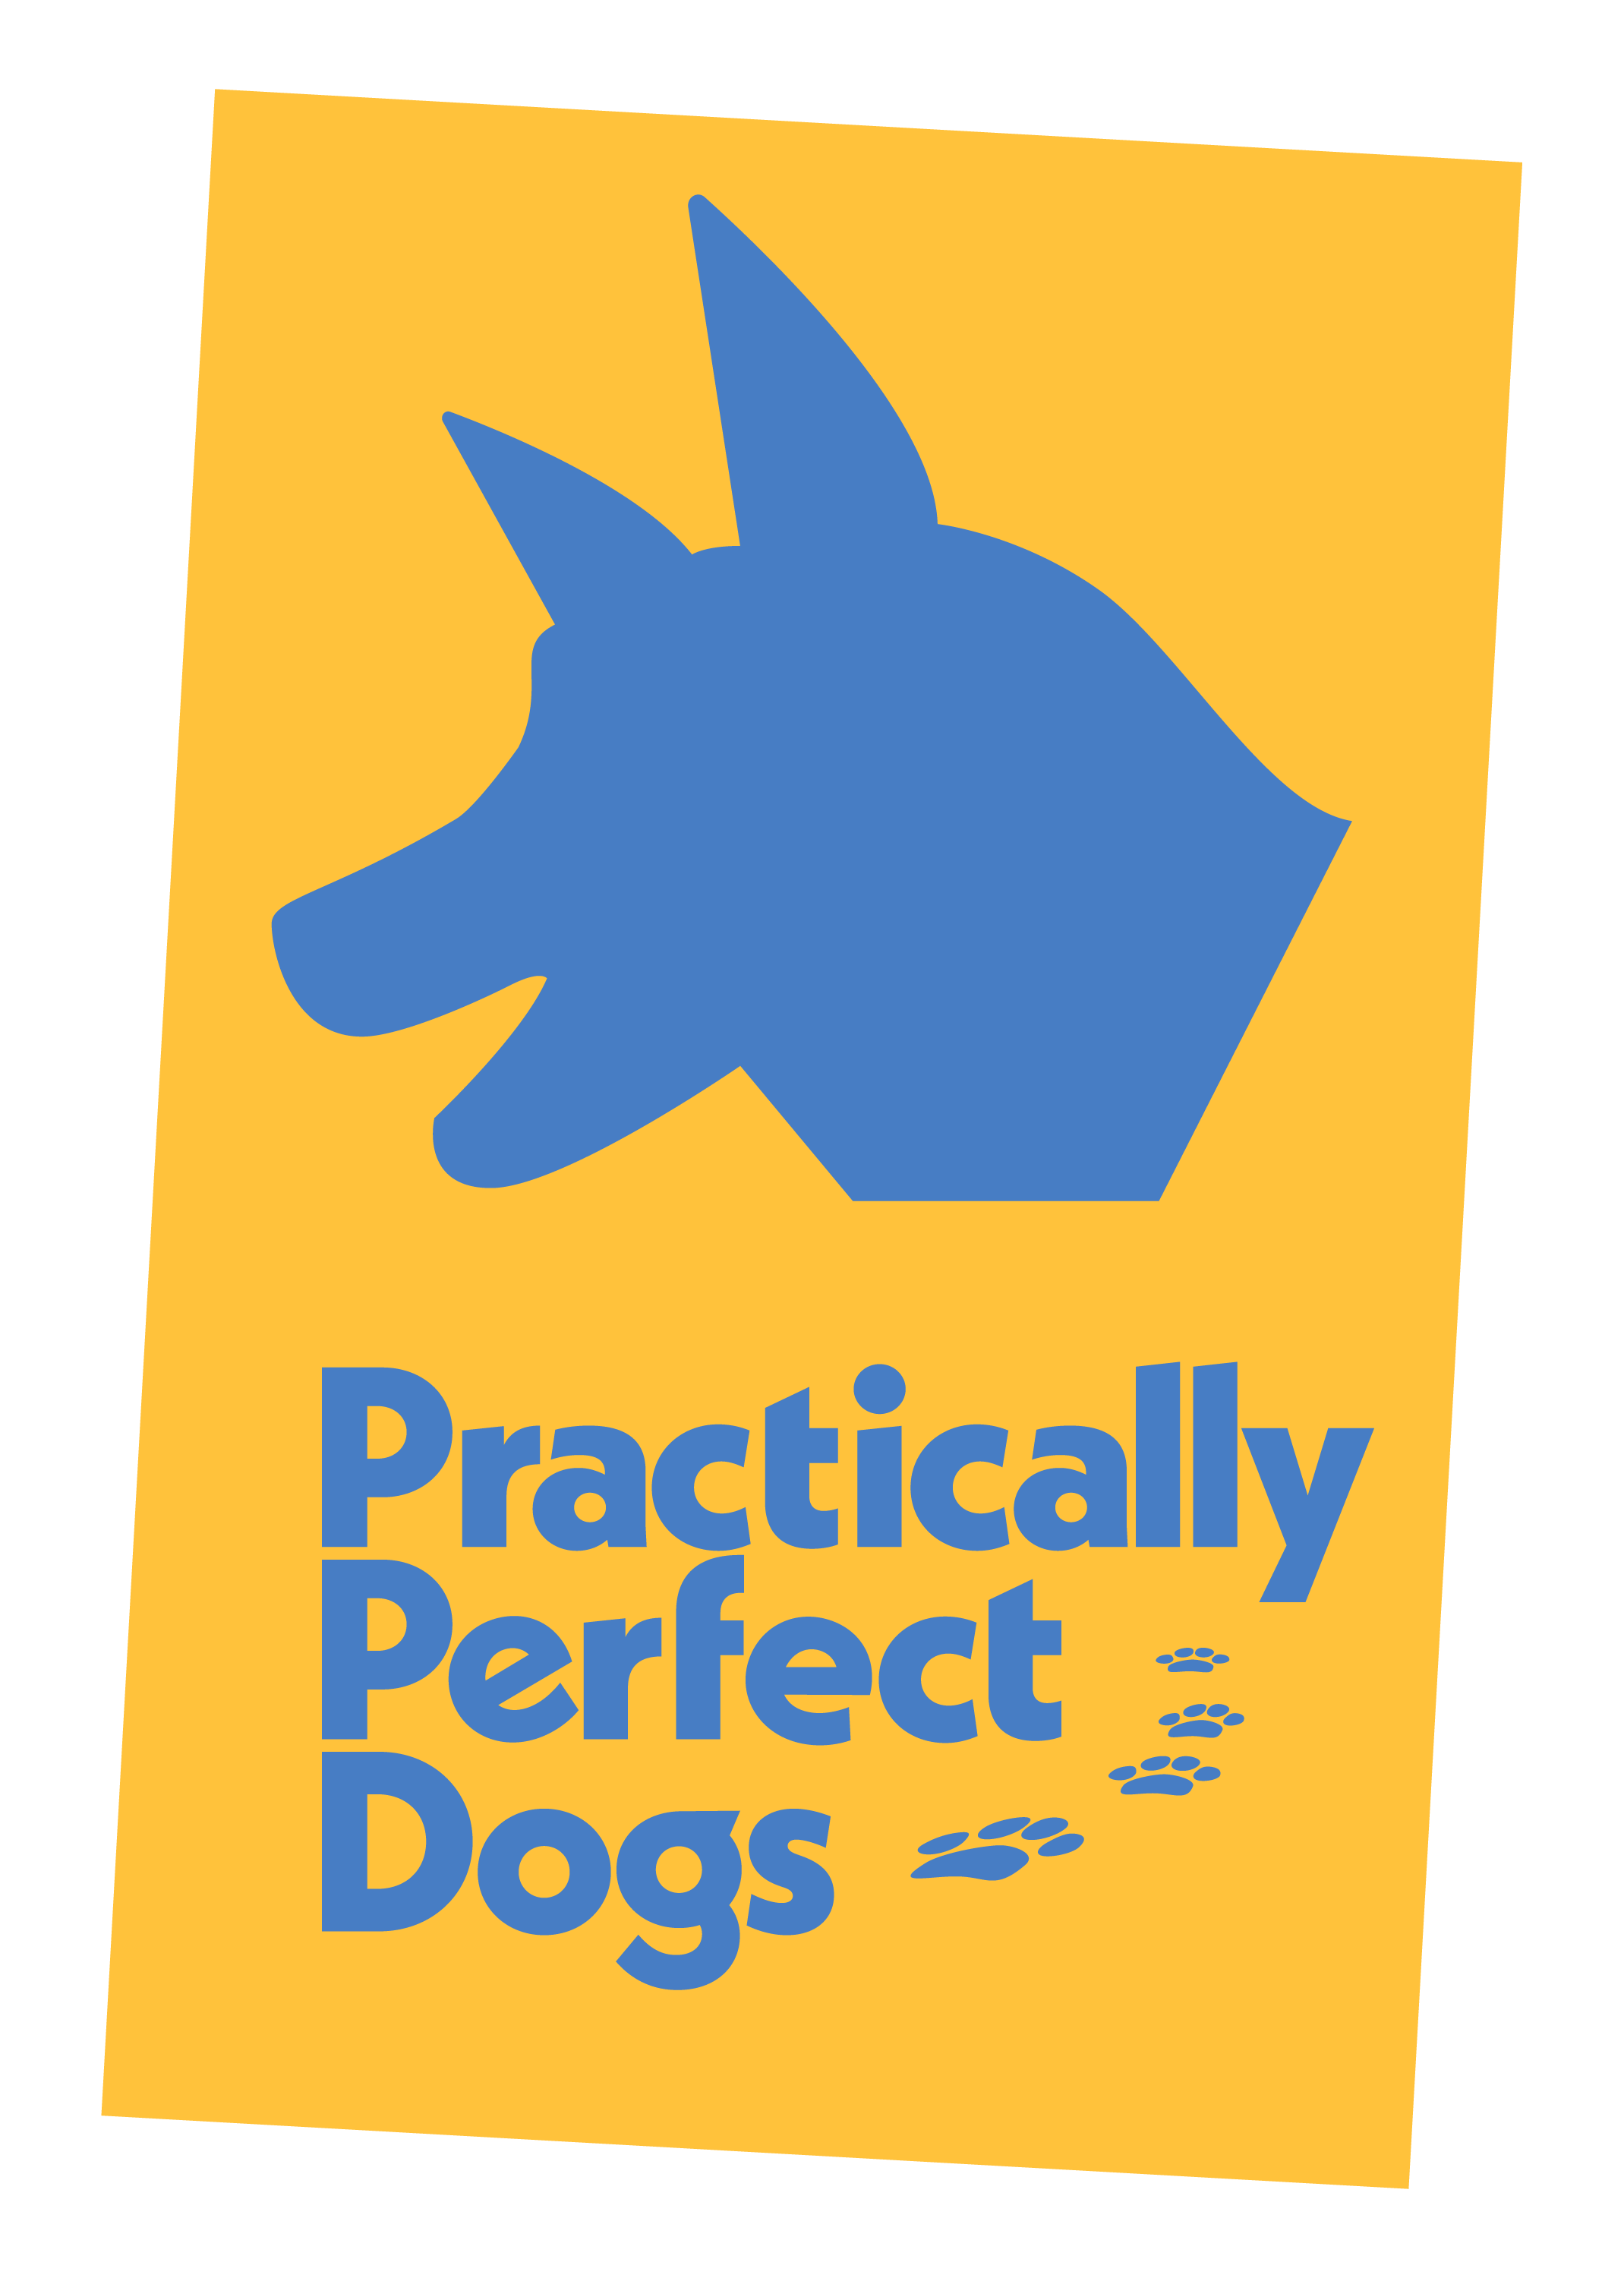 Practically Perfect Dogs - Branding